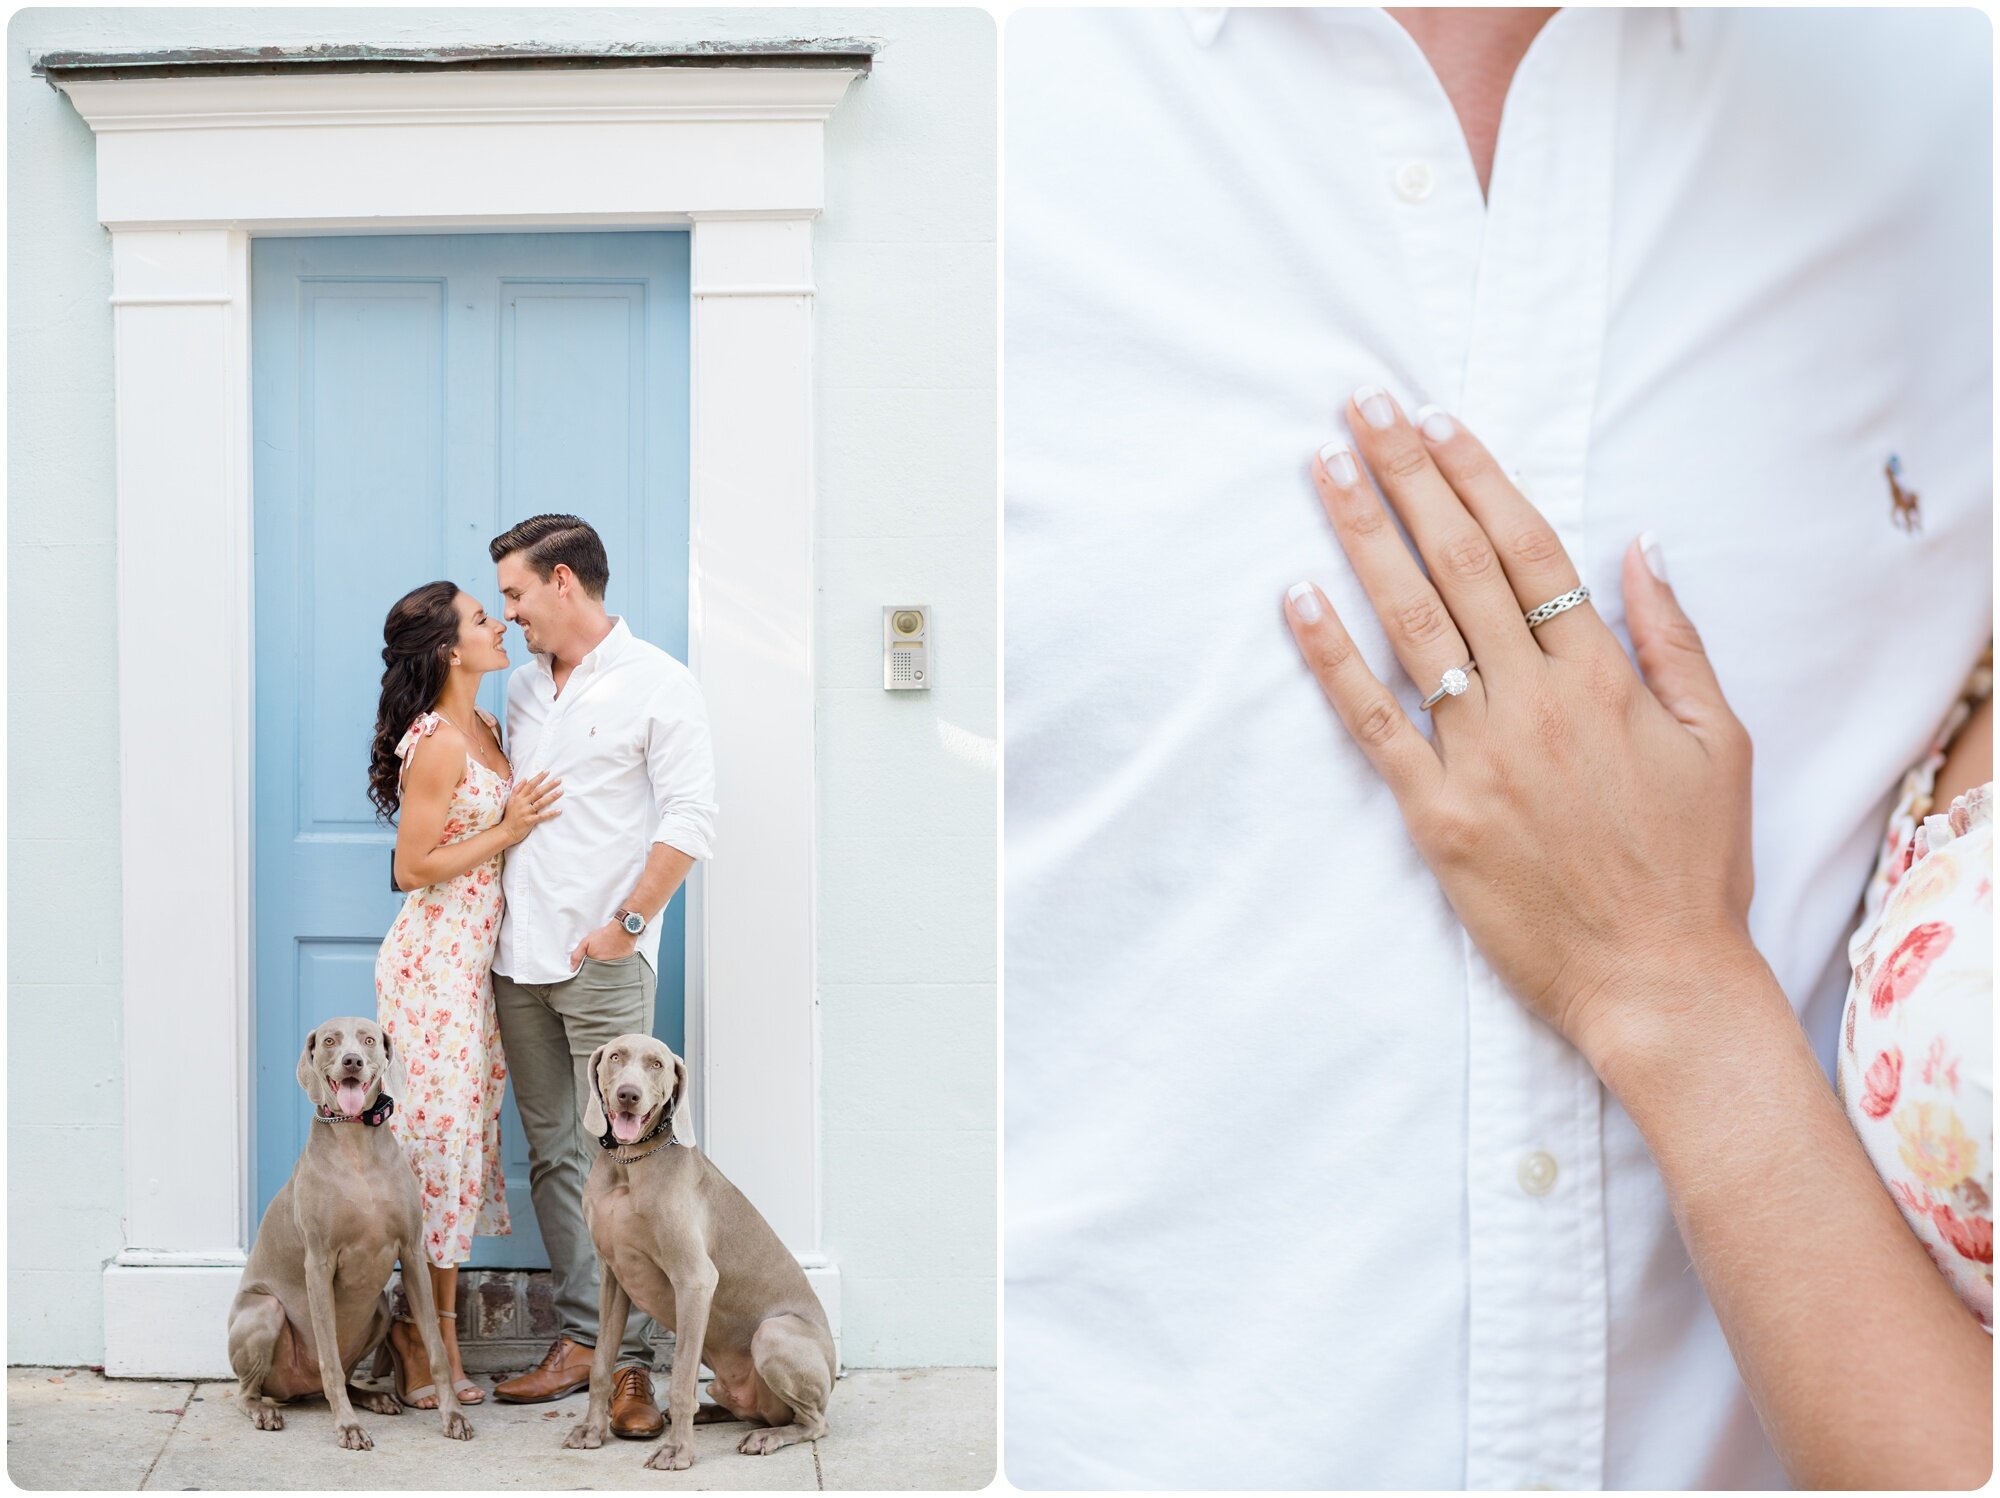 outdoor_engagement_session_candid_natural_charleston_destination_wedding_rainbow_row_colorful_kailee_dimeglio_photography_0004.jpg